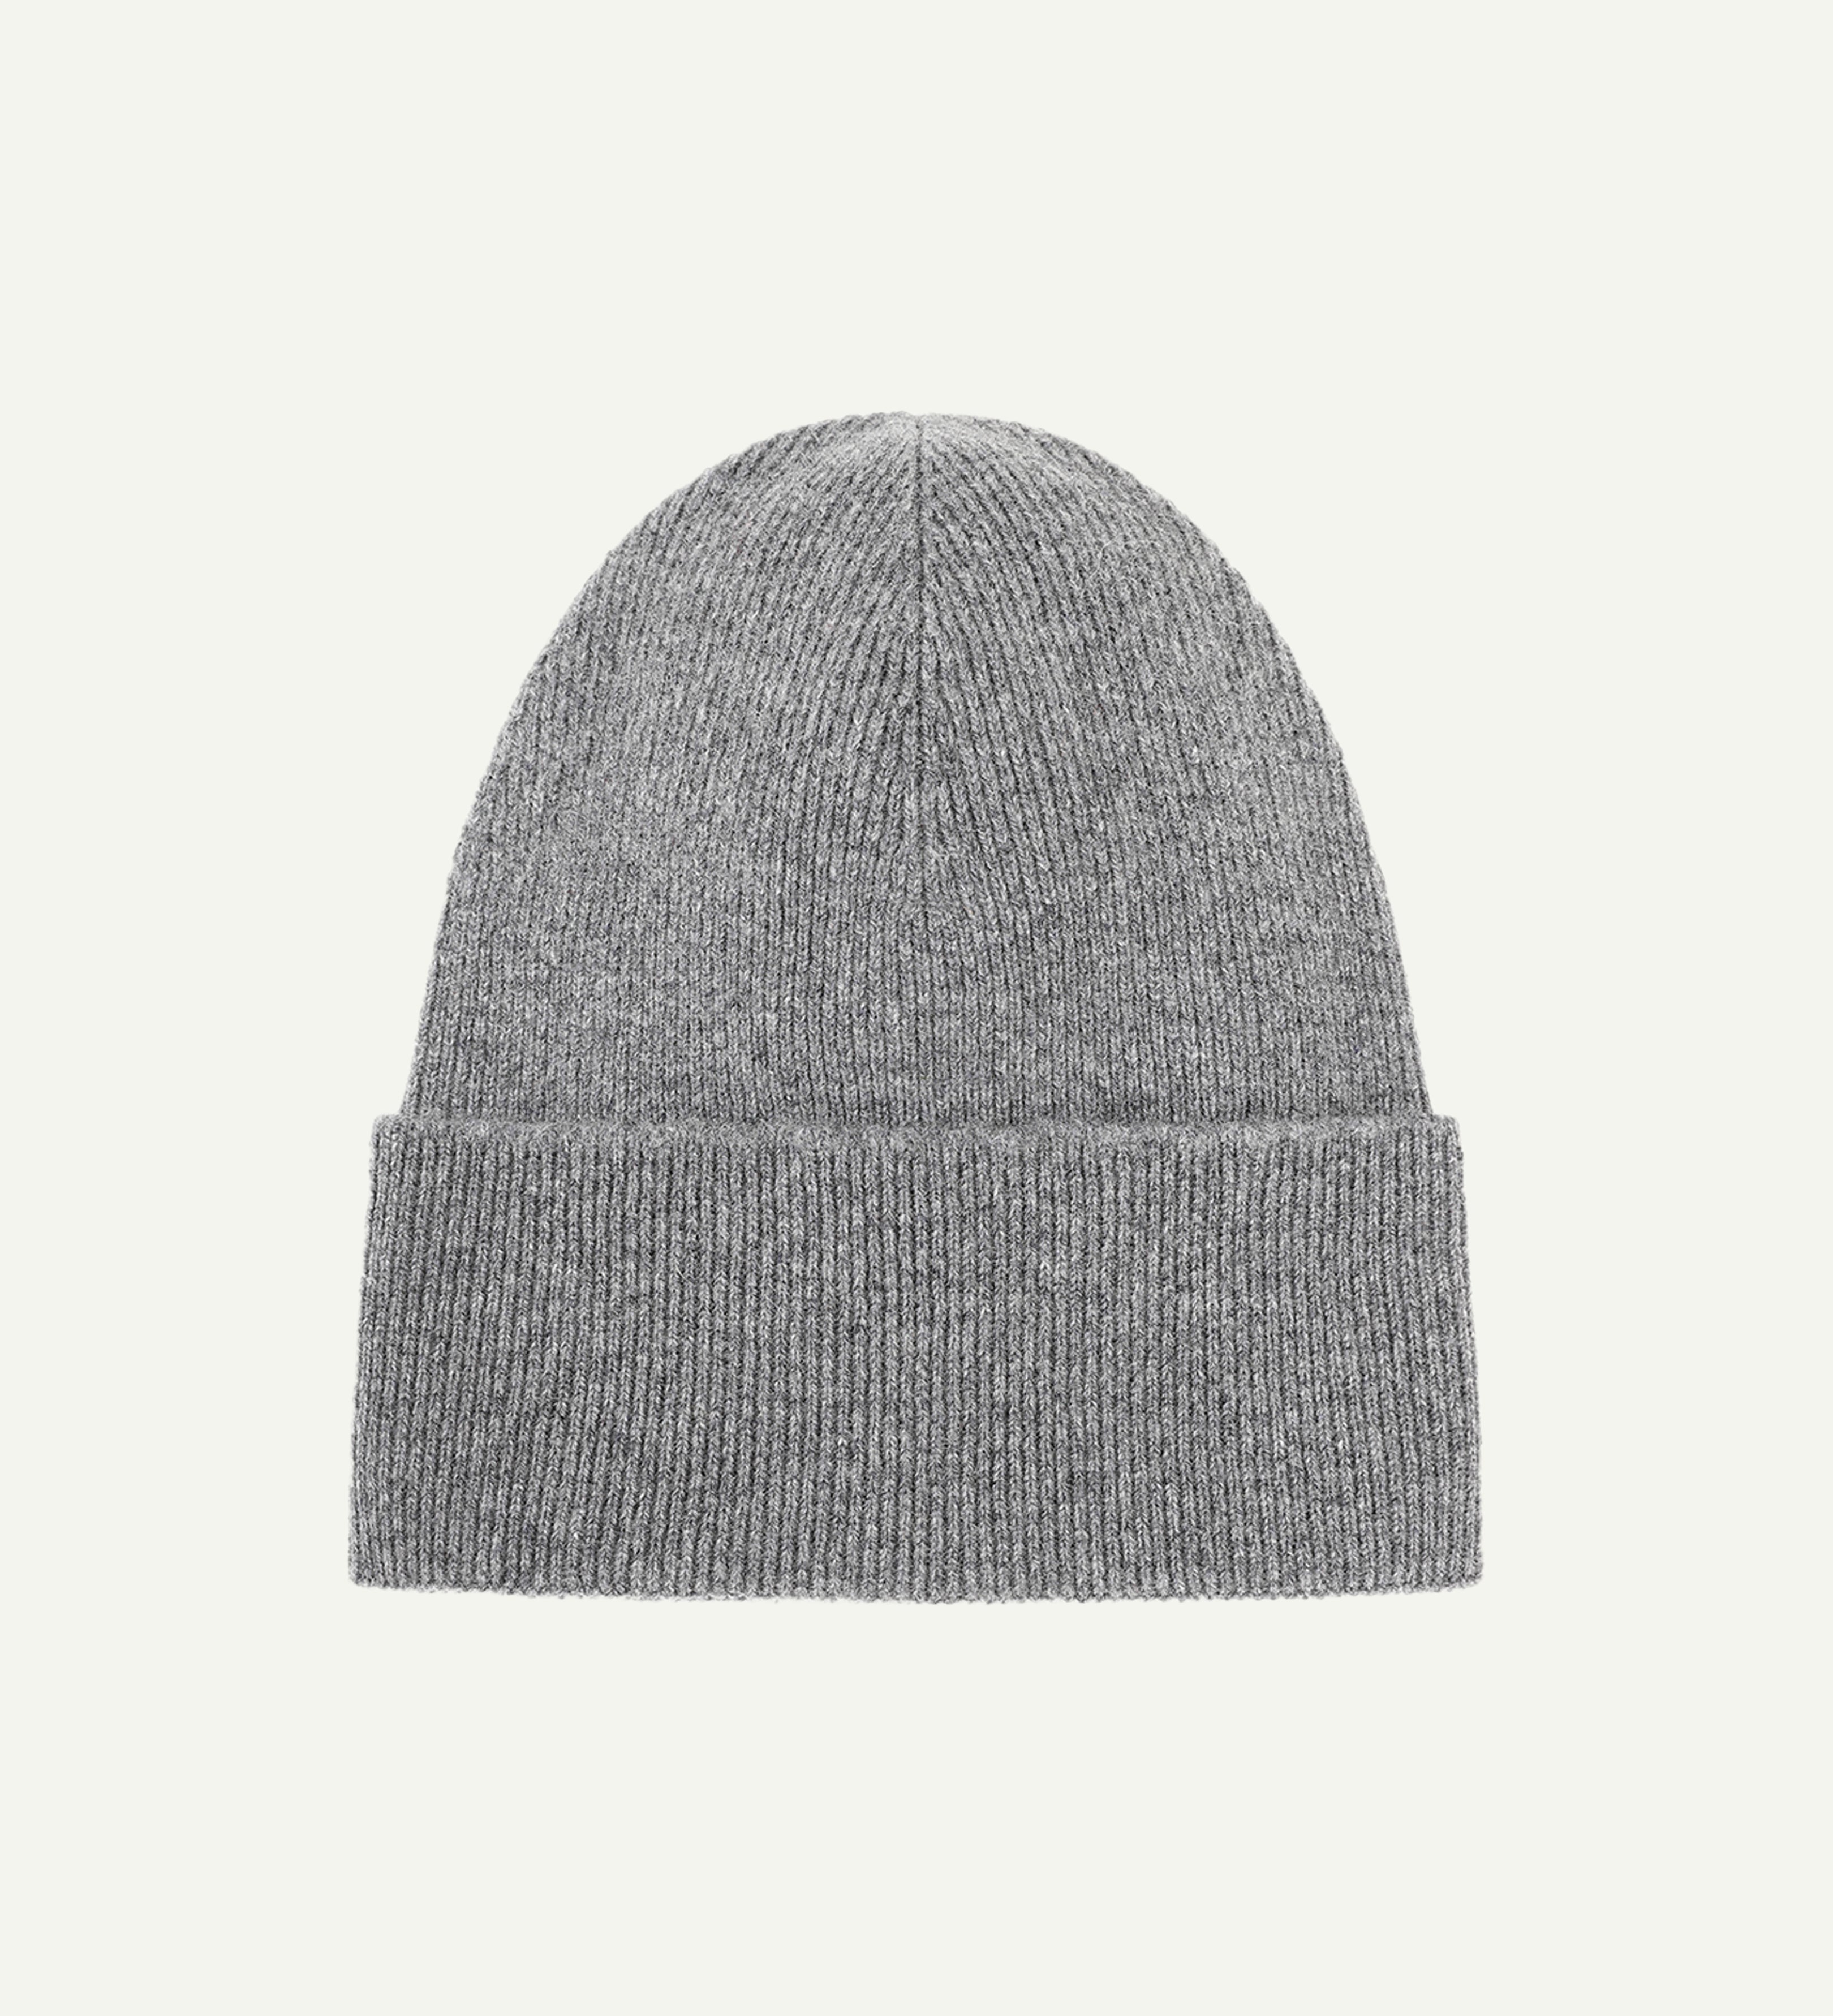 Flat view of Uskees 4004 grey wool hat, showing a clear view of the adjustable cuff and the ribbed texture of this light grey hat.